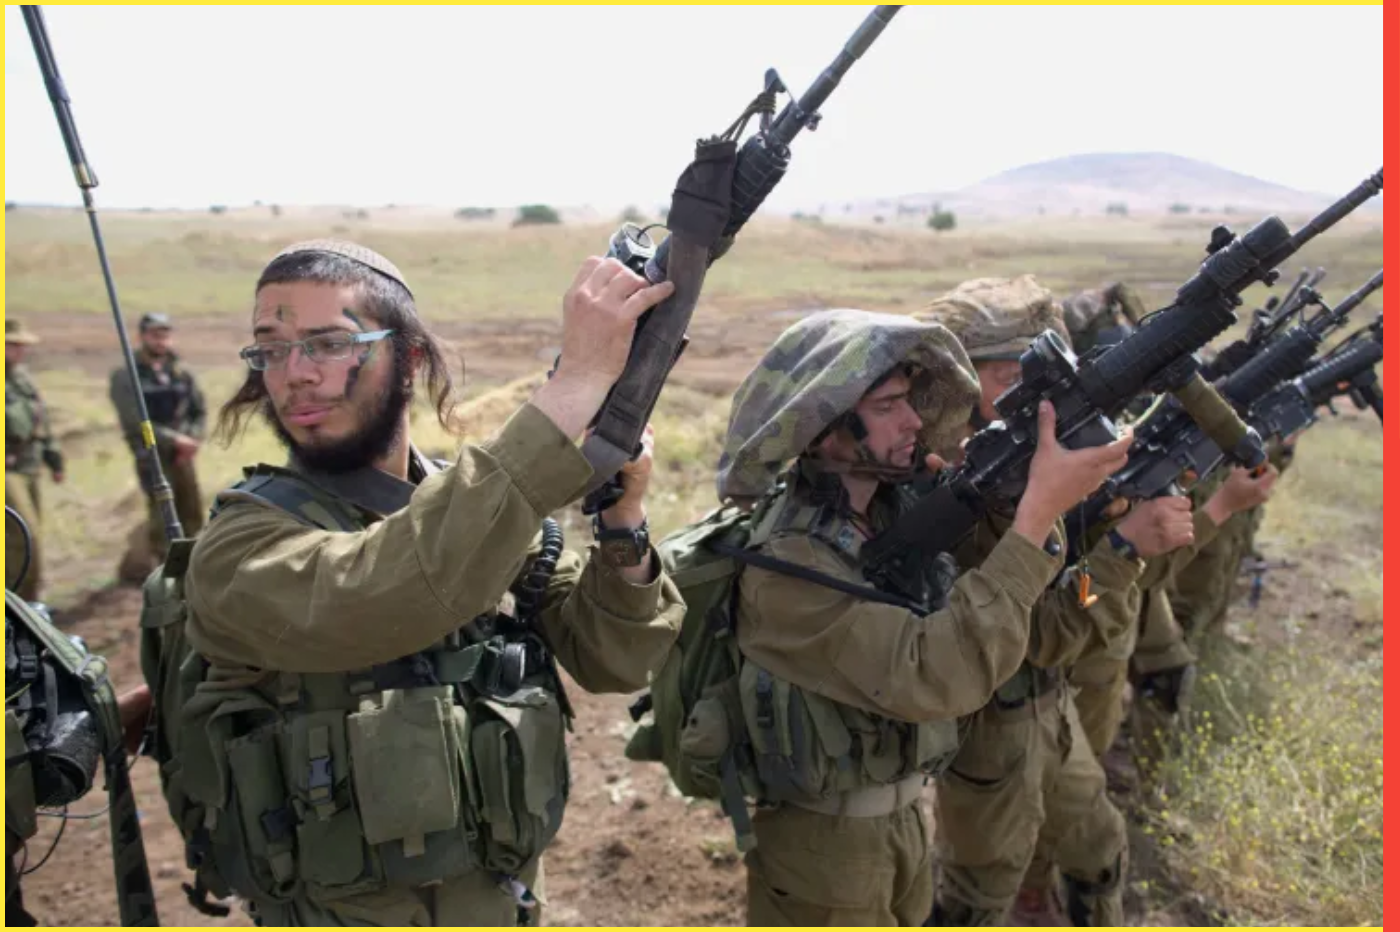 Israeli soldiers of the Ultra-Orthodox battalion "Netzah Yehuda" take part in their annual unit training in the Israeli annexed Golan Heights, near the Syrian border on May 19, 2014. The Netzah Yehuda Battalion is a battalion in the Kfir Brigade of the Israel military which was created to allow religious Israelis to serve in the army in an atmosphere respecting their religious convictions. AFP PHOTO/MENAHEM KAHANA (Photo credit should read MENAHEM KAHANA/AFP via Getty Images)